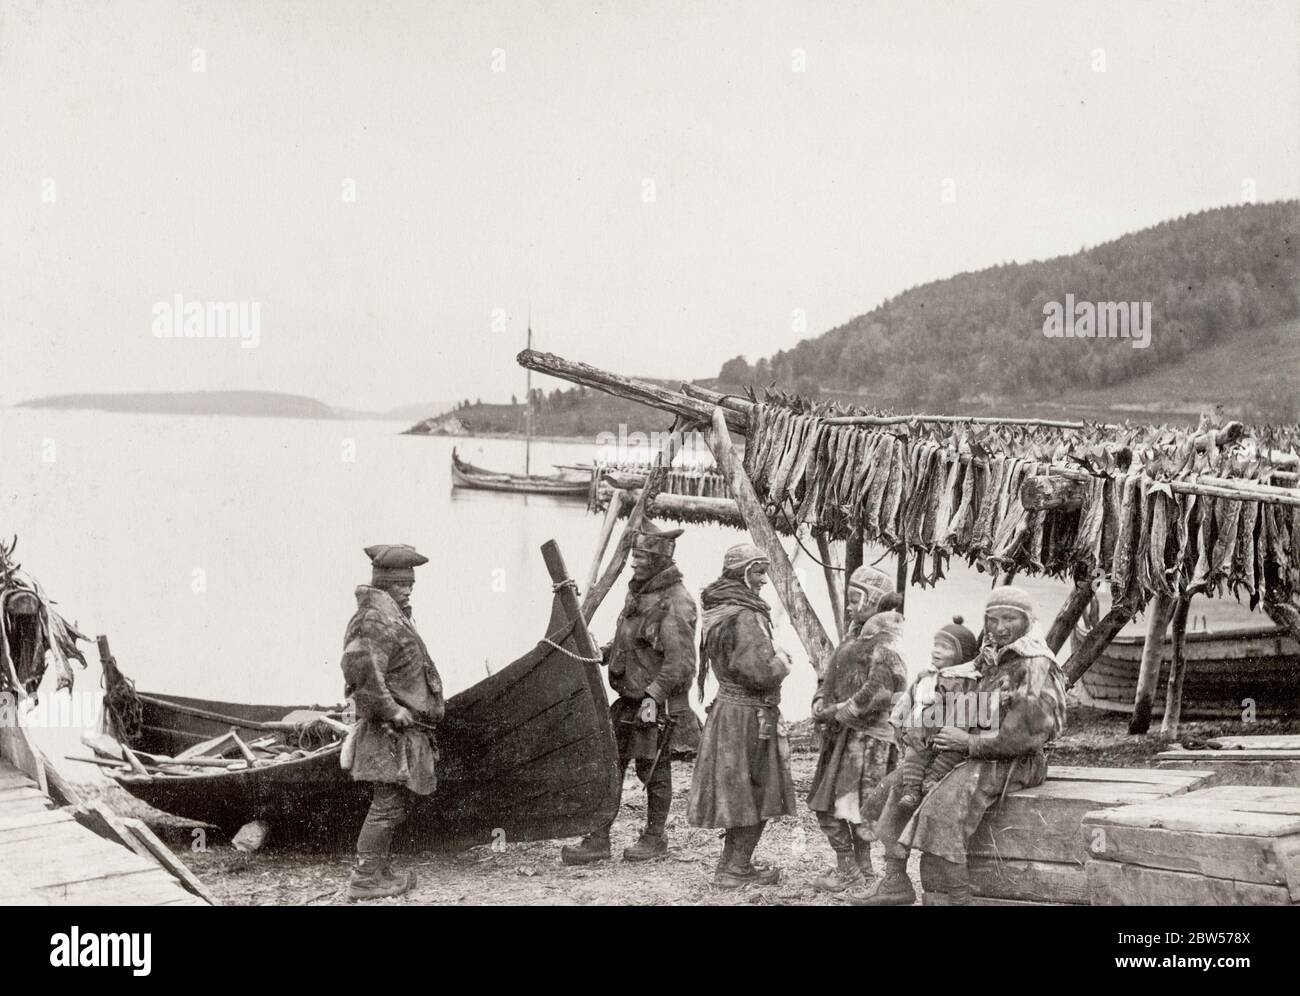 Vintage 19th century photograph - Tromso, Norway, fishermen and family with drying fish. Stock Photo